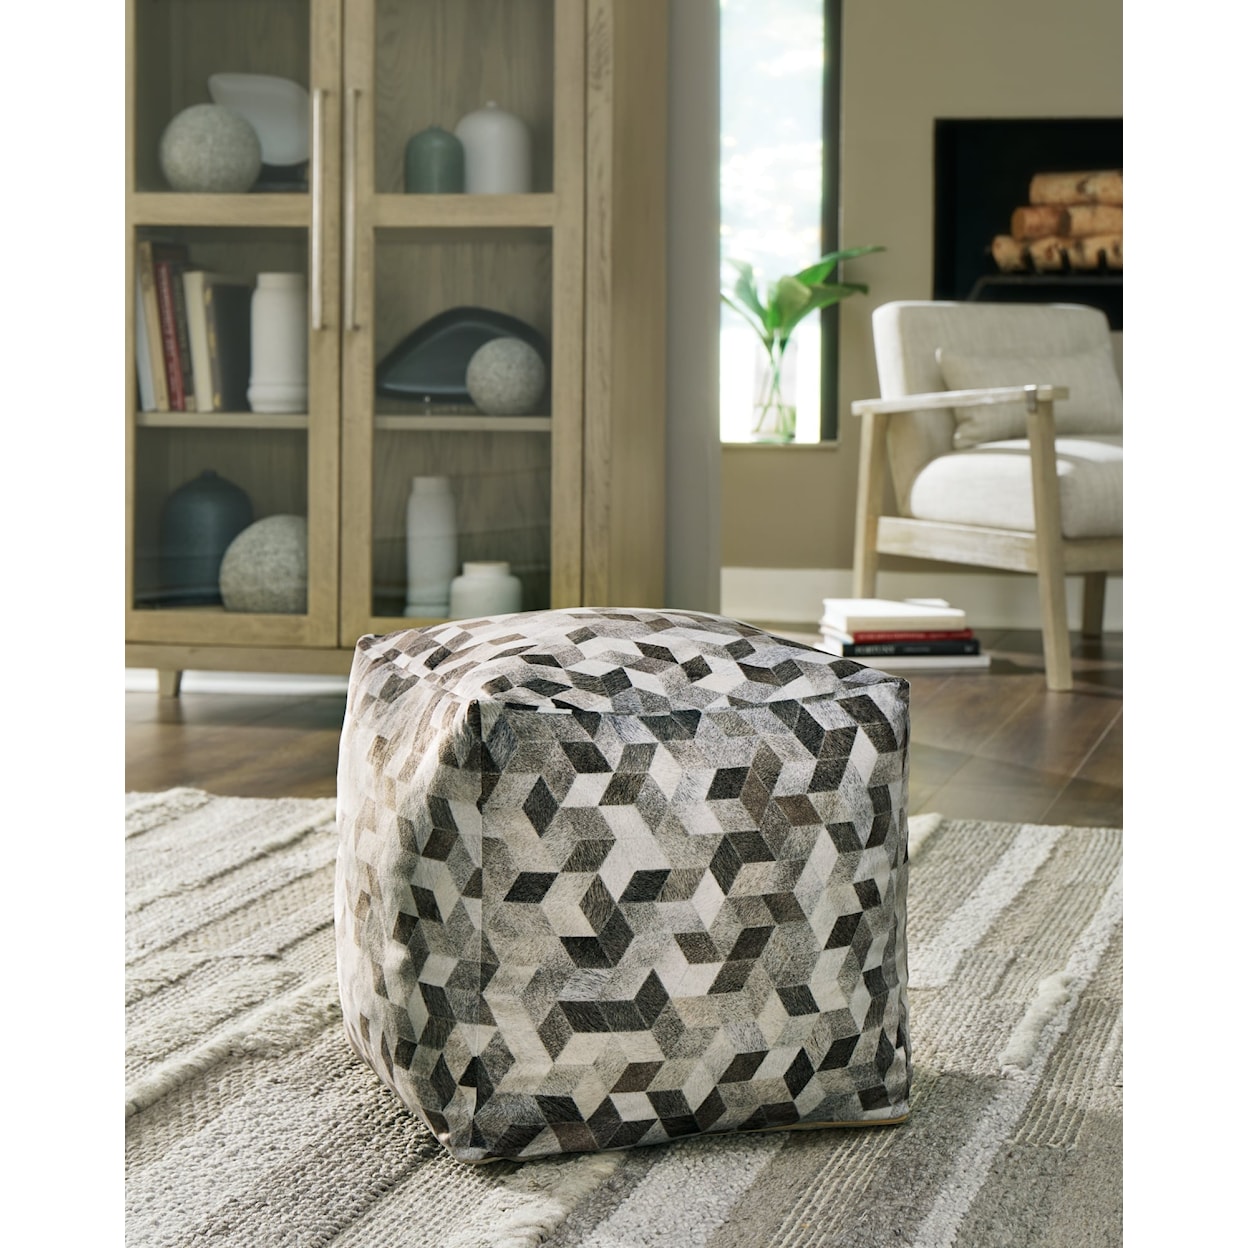 Signature Design by Ashley Albermarle Pouf